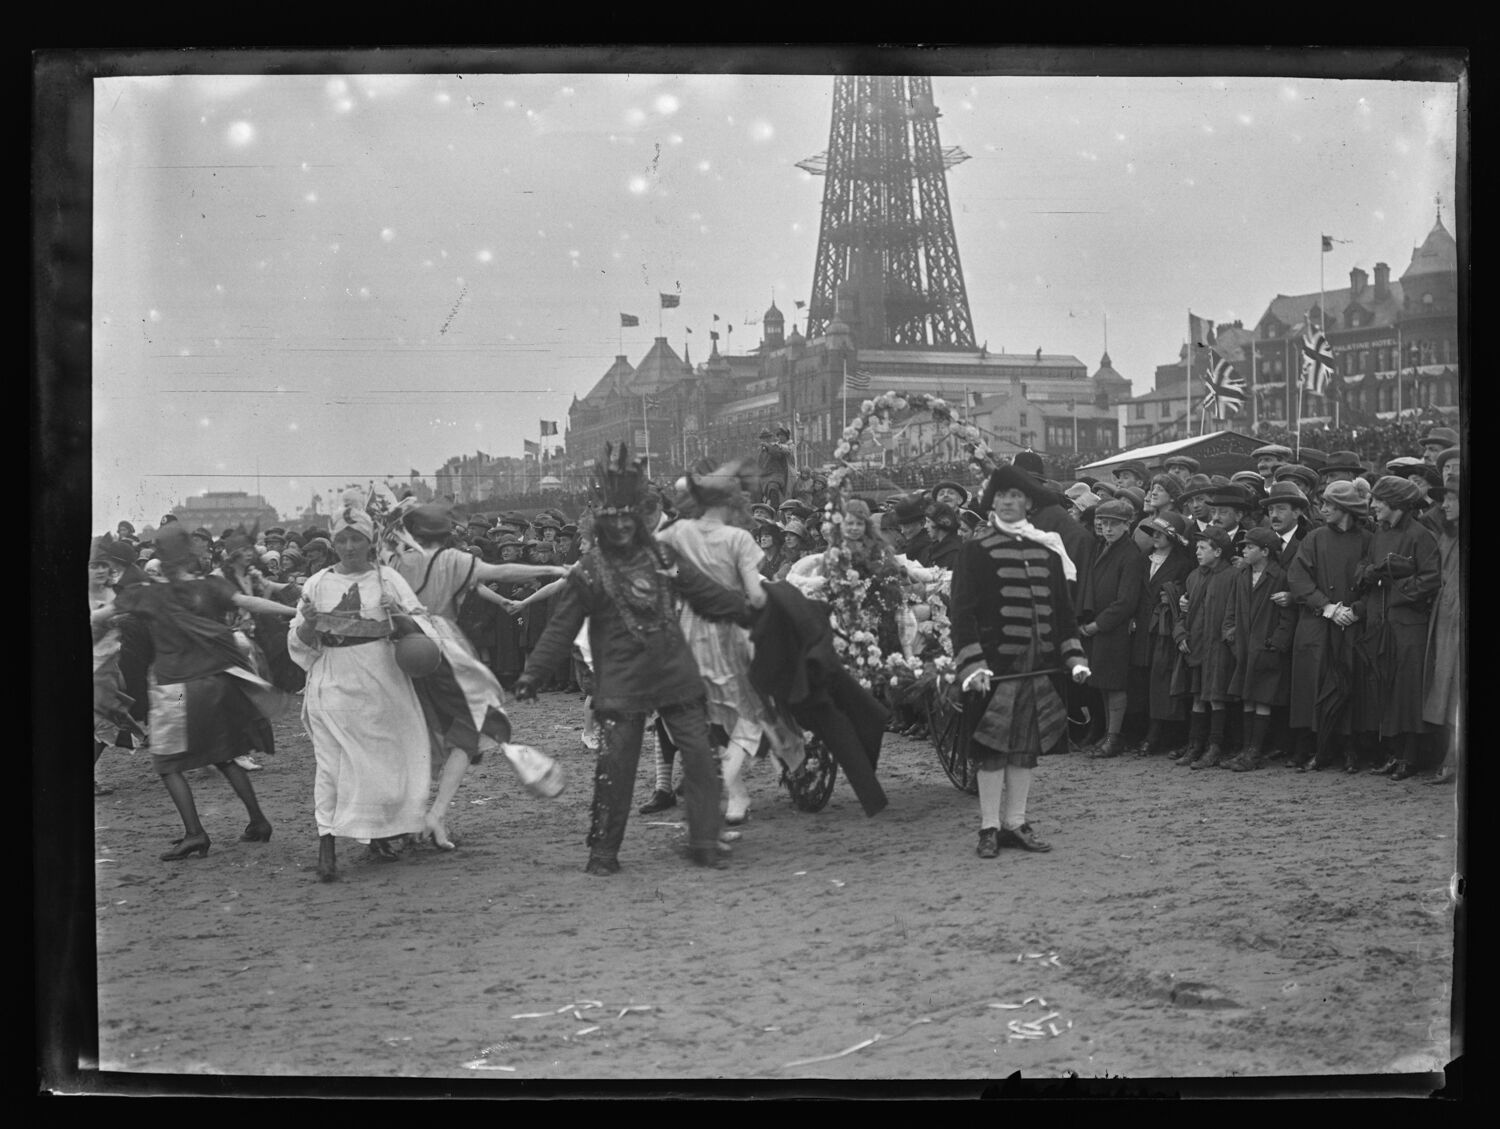 Revellers at South Shore Carnival, Blackpool